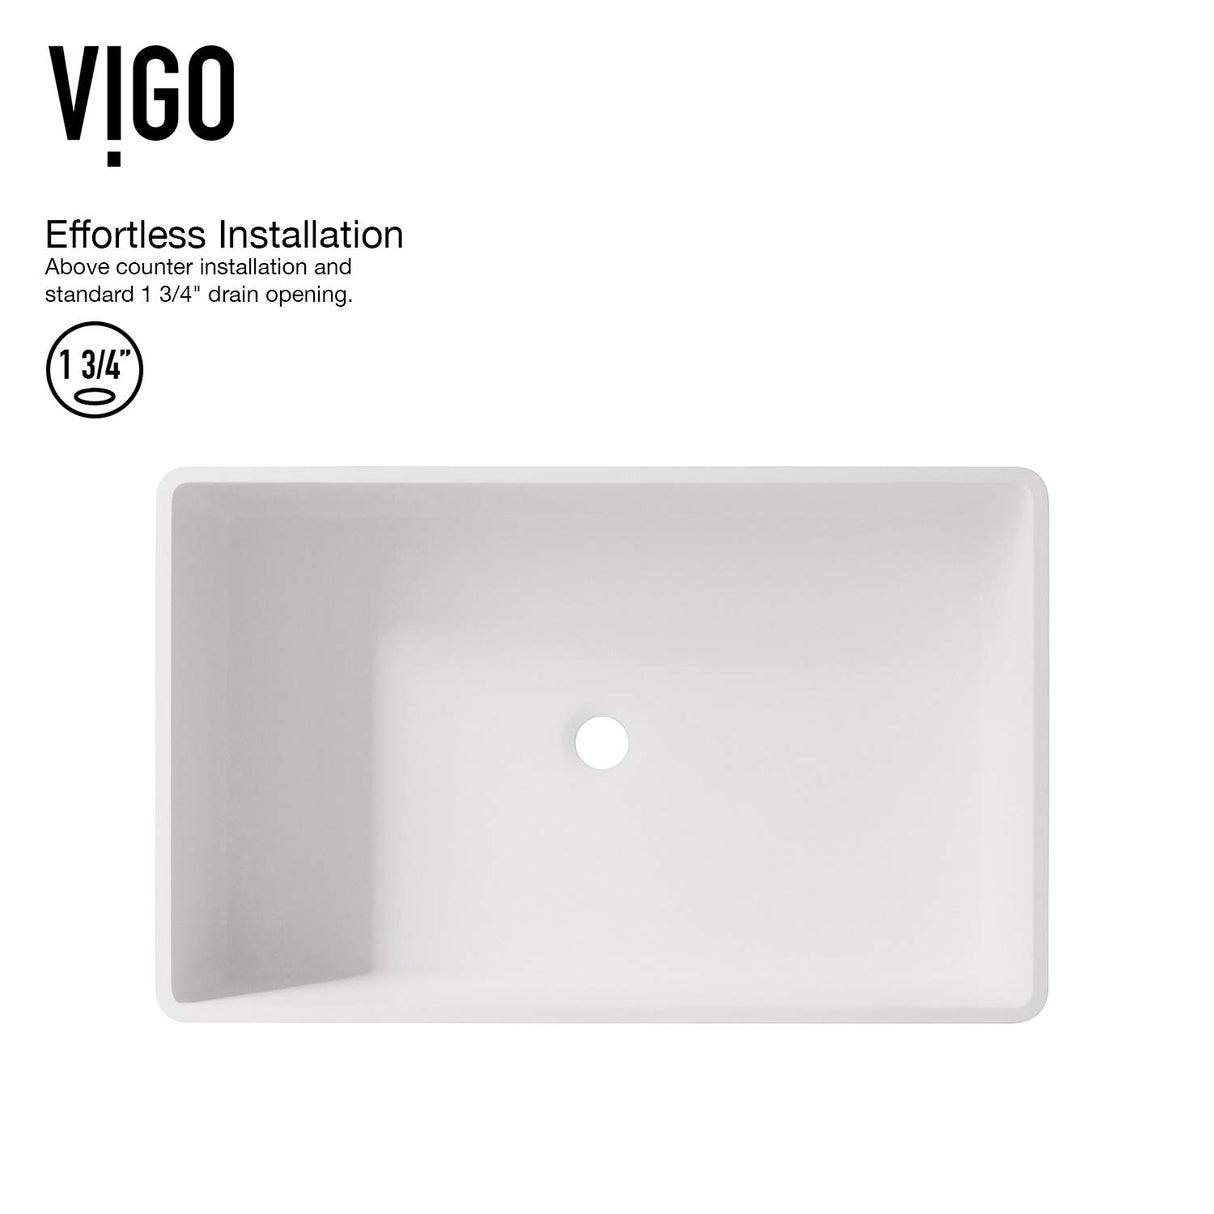 VIGO VGT963 13.88" L -21.25" W -3.13" H Handmade Countertop White Matte Stone Rectangle Vessel Bathroom Sink Set in Matte White Finish with Chrome Single-Handle Wall Mount Faucet and Pop Up Drain